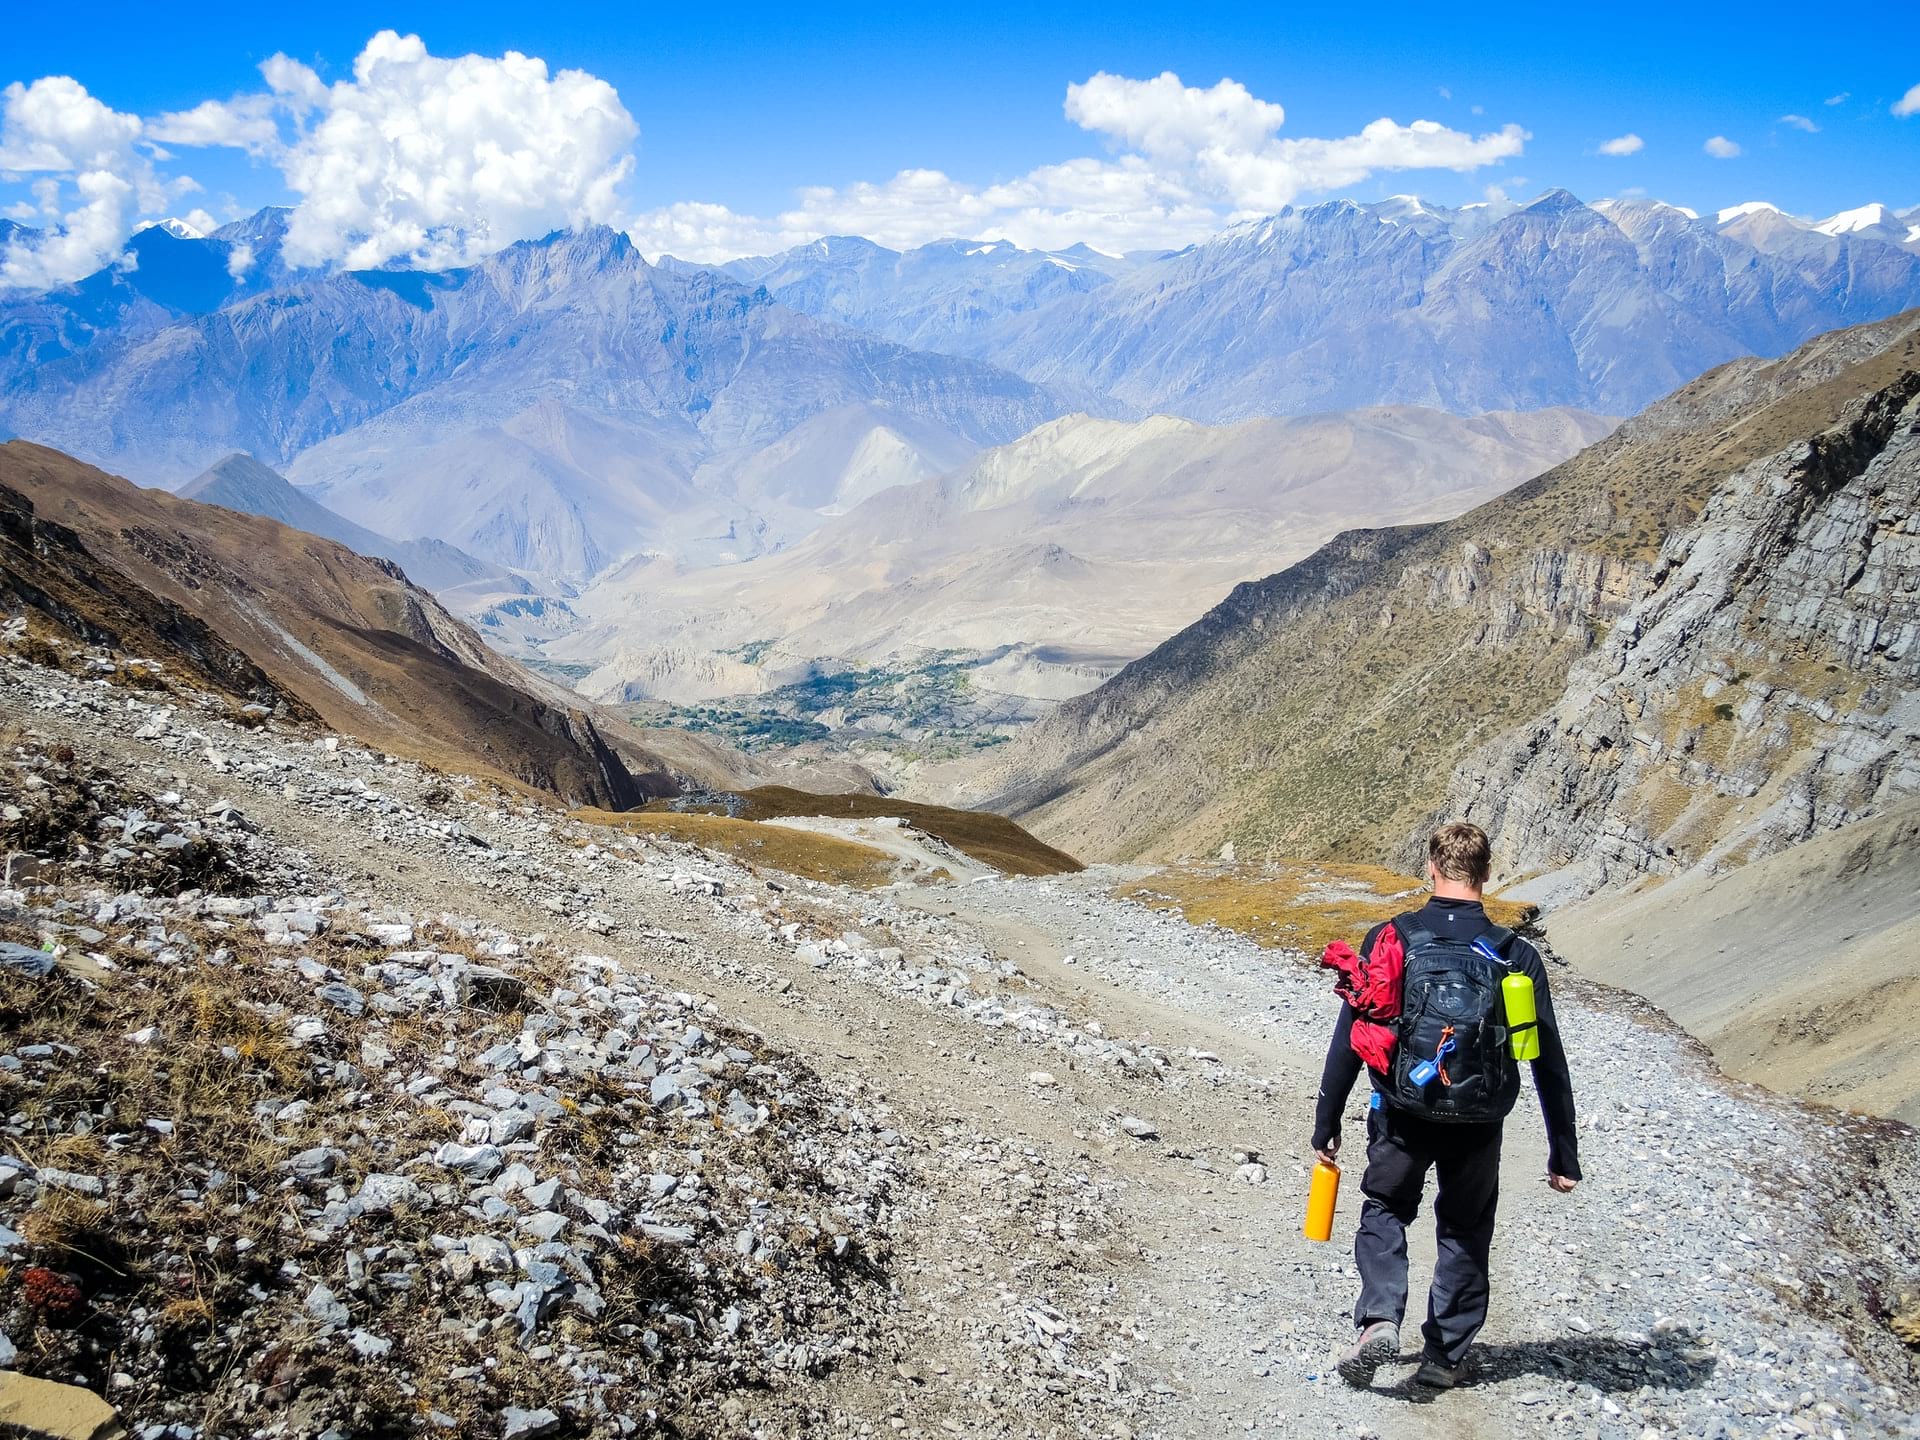 Solo Trekking Nepal: How to Plan Your Trip